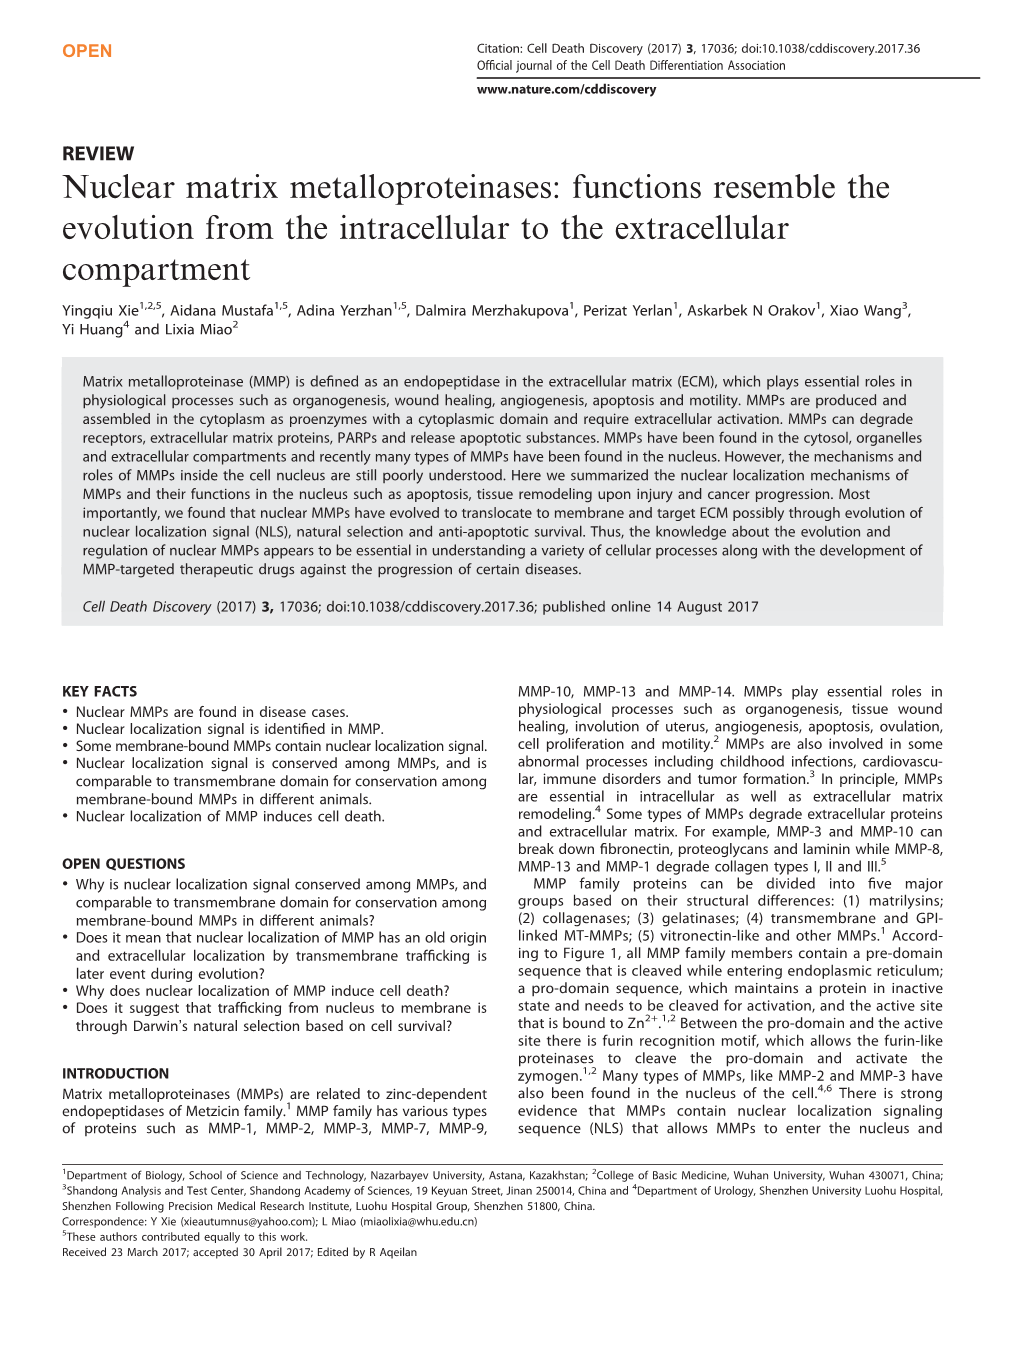 Nuclear Matrix Metalloproteinases: Functions Resemble the Evolution from the Intracellular to the Extracellular Compartment